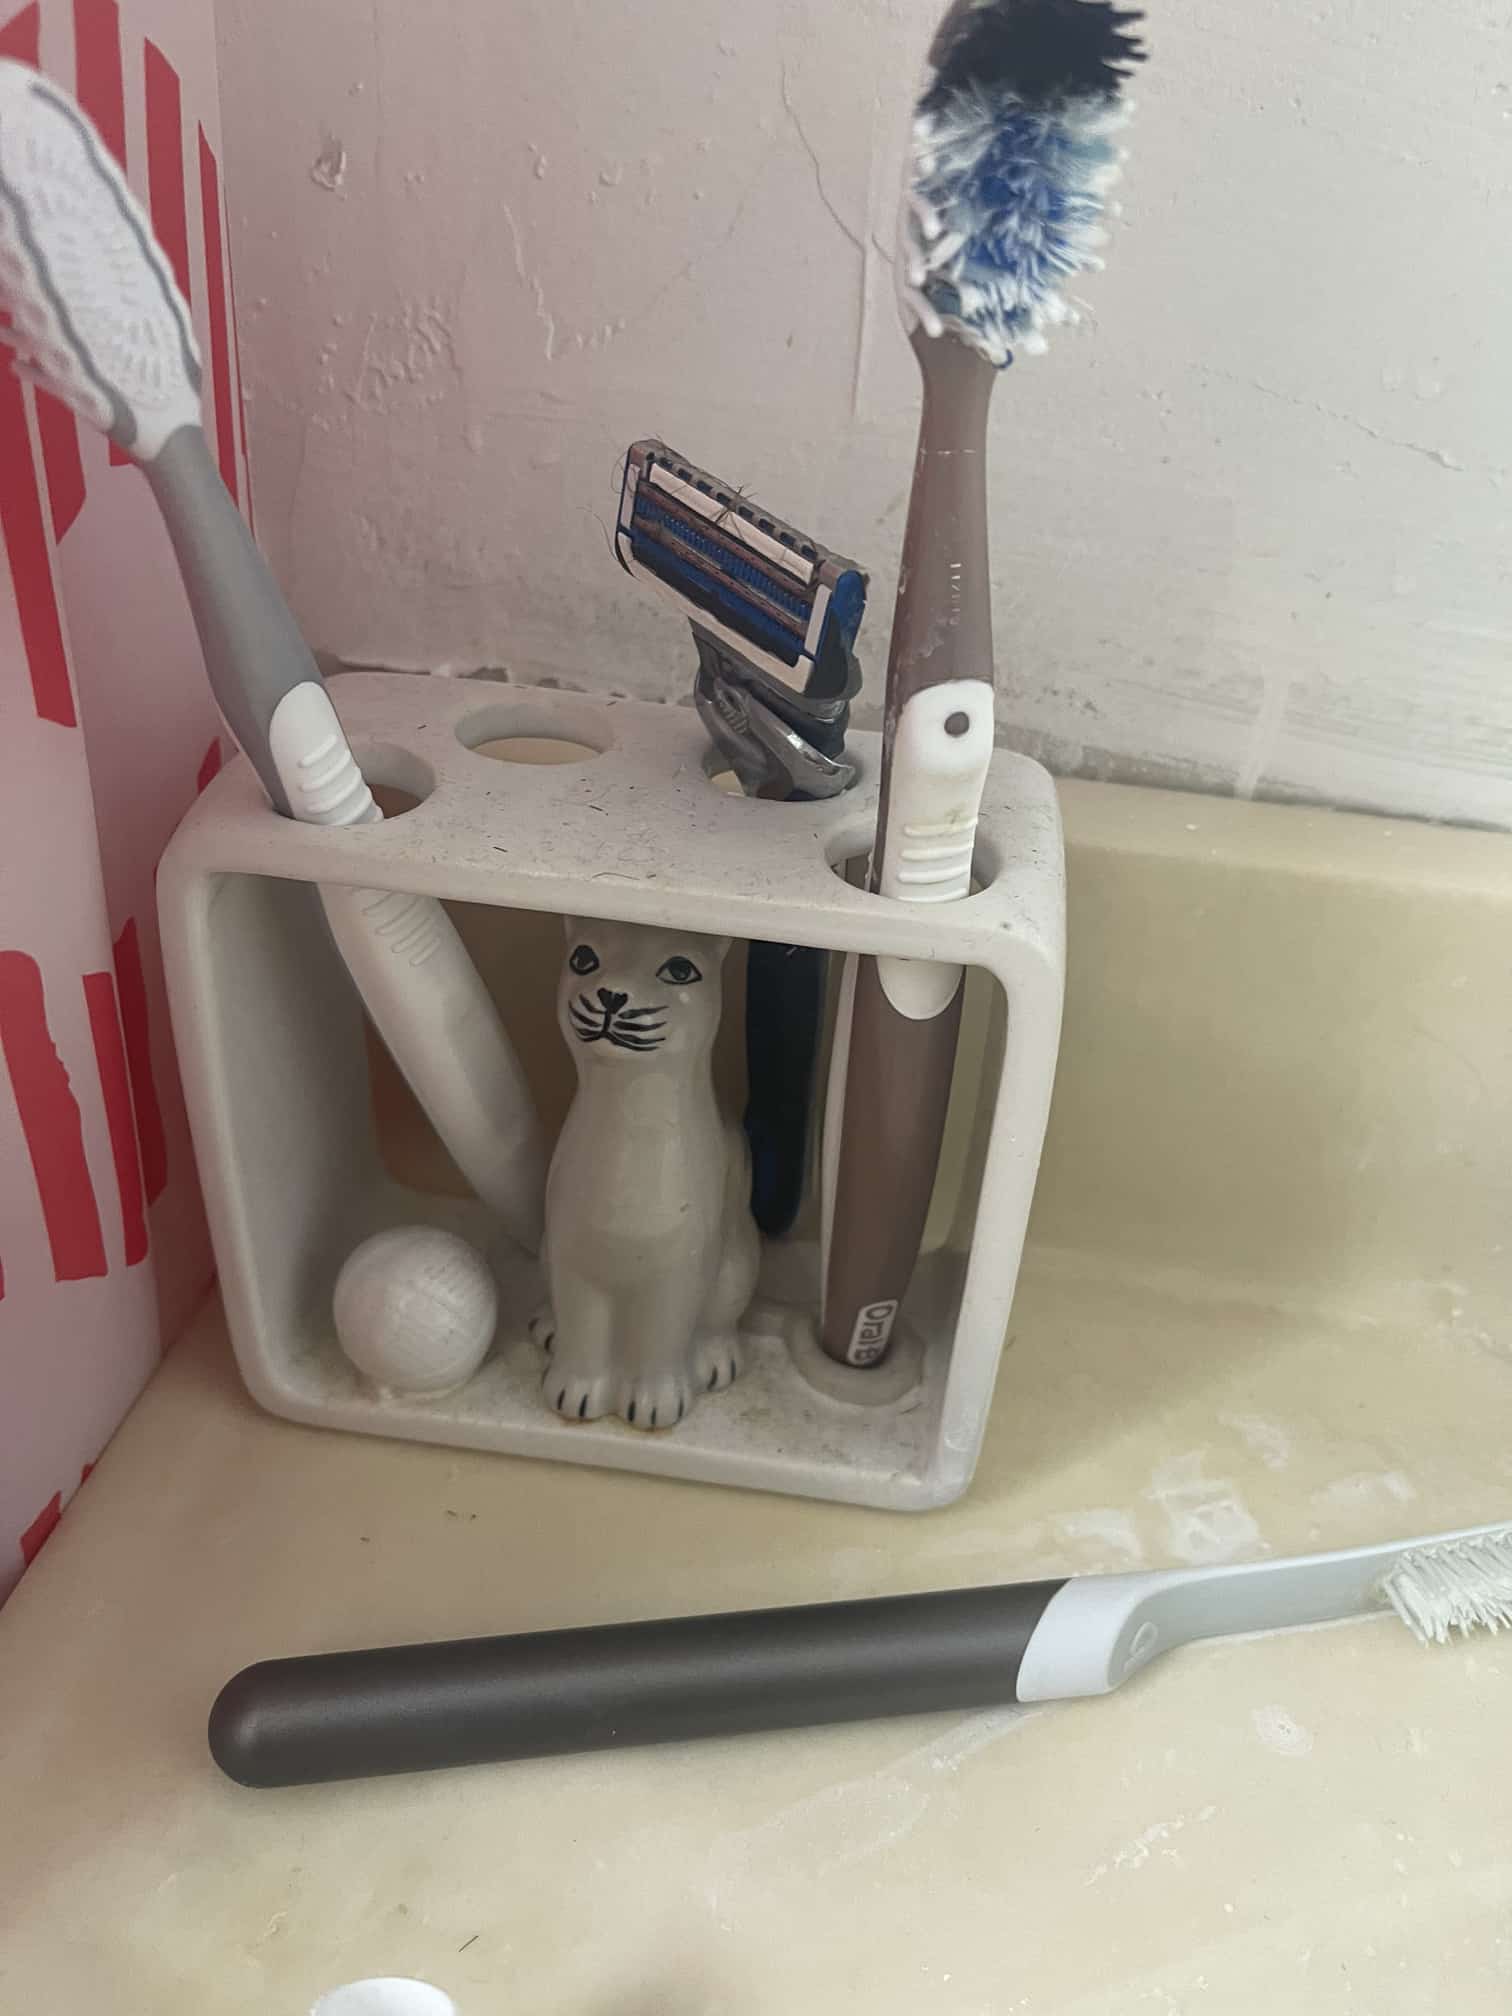 Seal holder for brushes and bathroom accessories